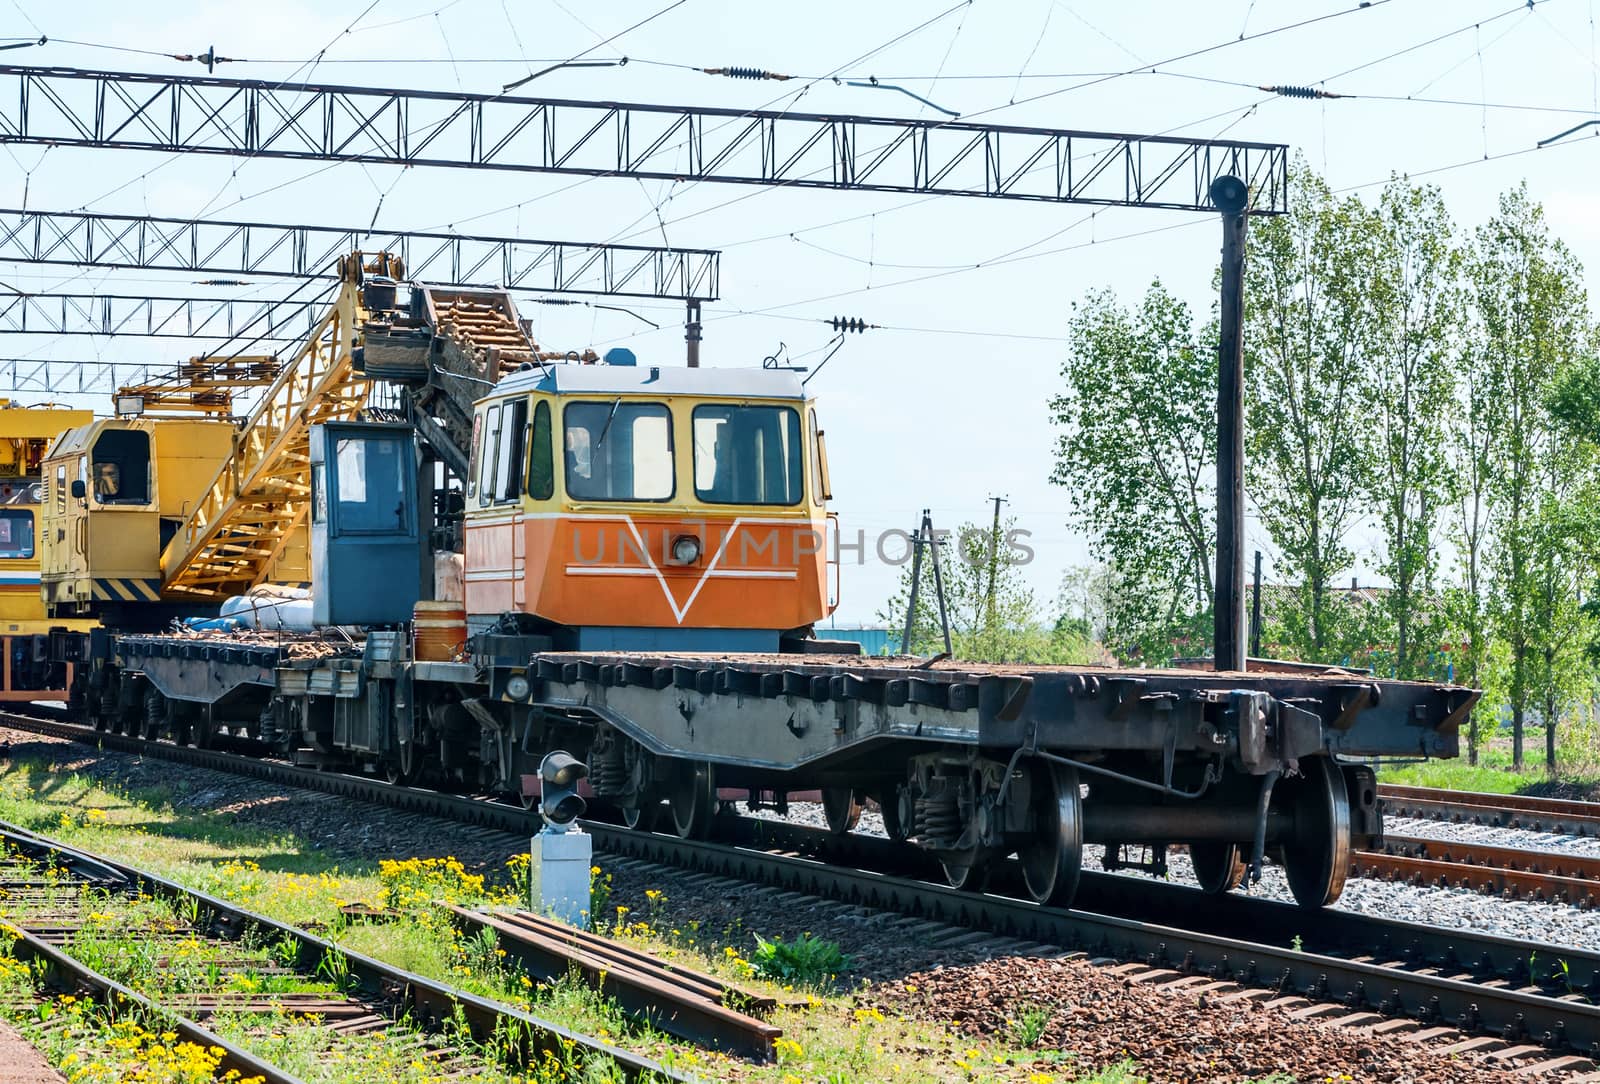 Train with special track equipment at repairs  by zeffss